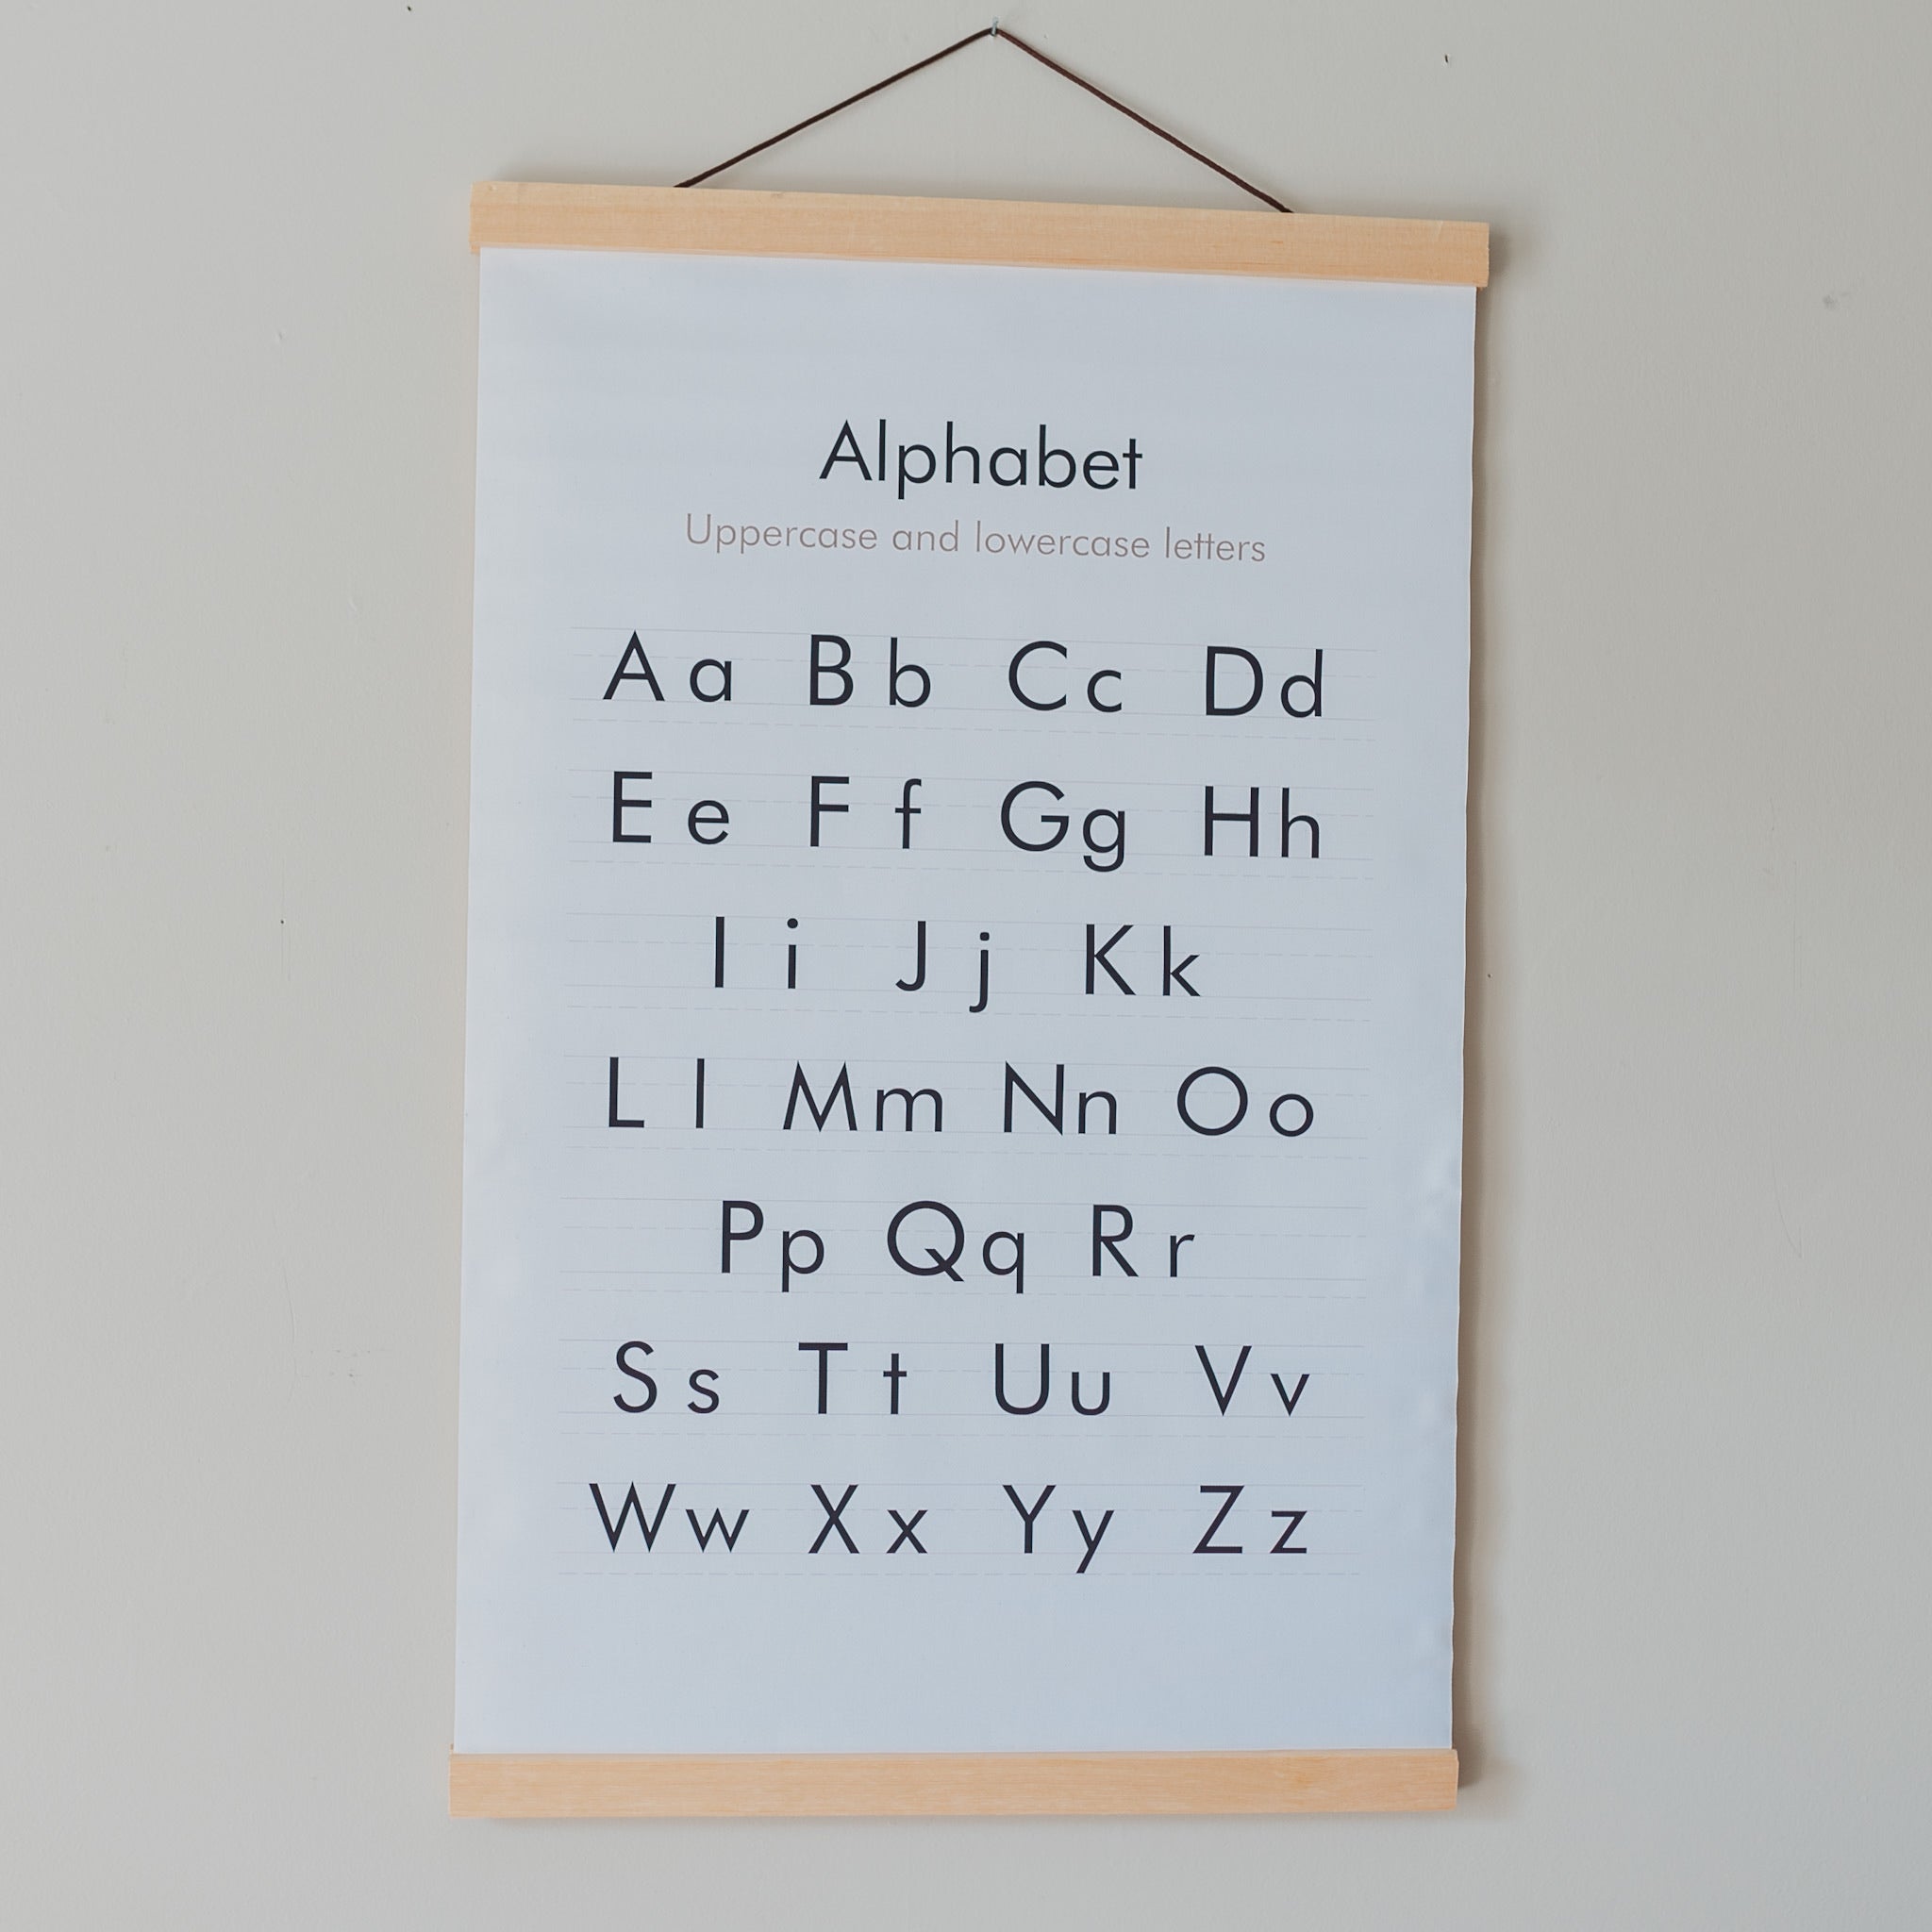 Alphabet Poster (physical product)